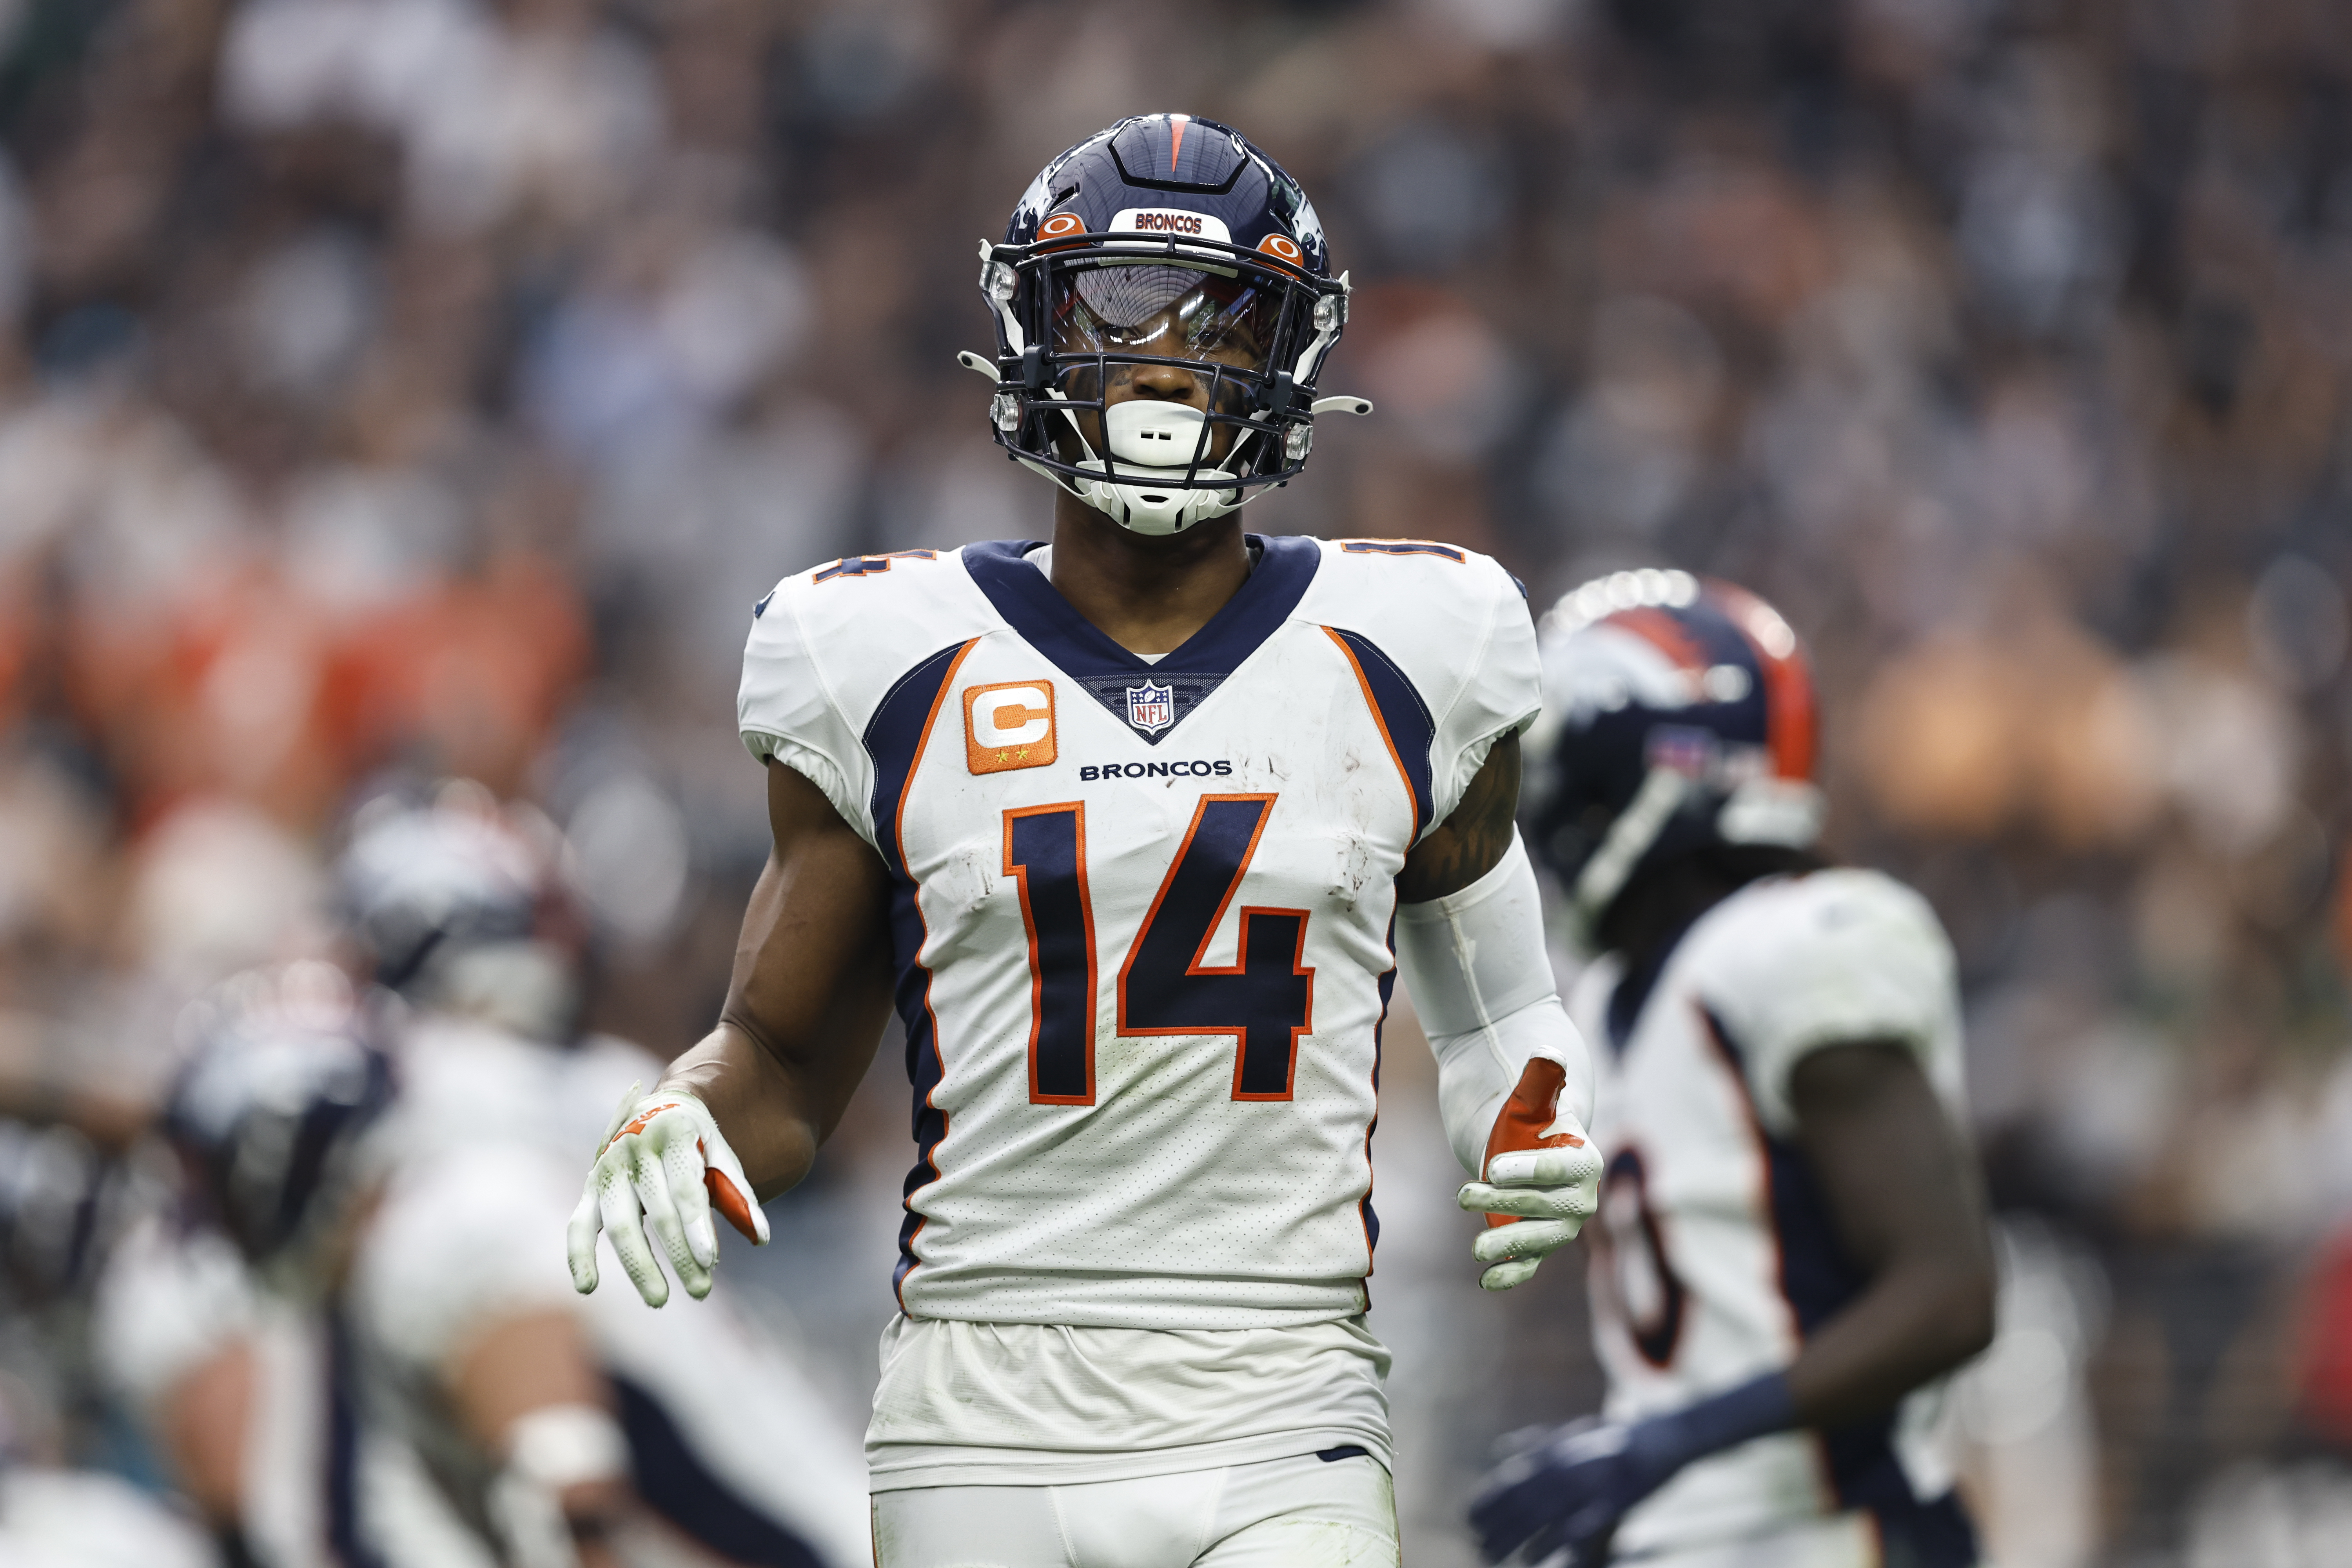 Courtland Sutton of the Denver Broncos looks on during an NFL football game between the Las Vegas Raiders and the Denver Broncos at Allegiant Stadium on October 02, 2022 in Las Vegas, Nevada.